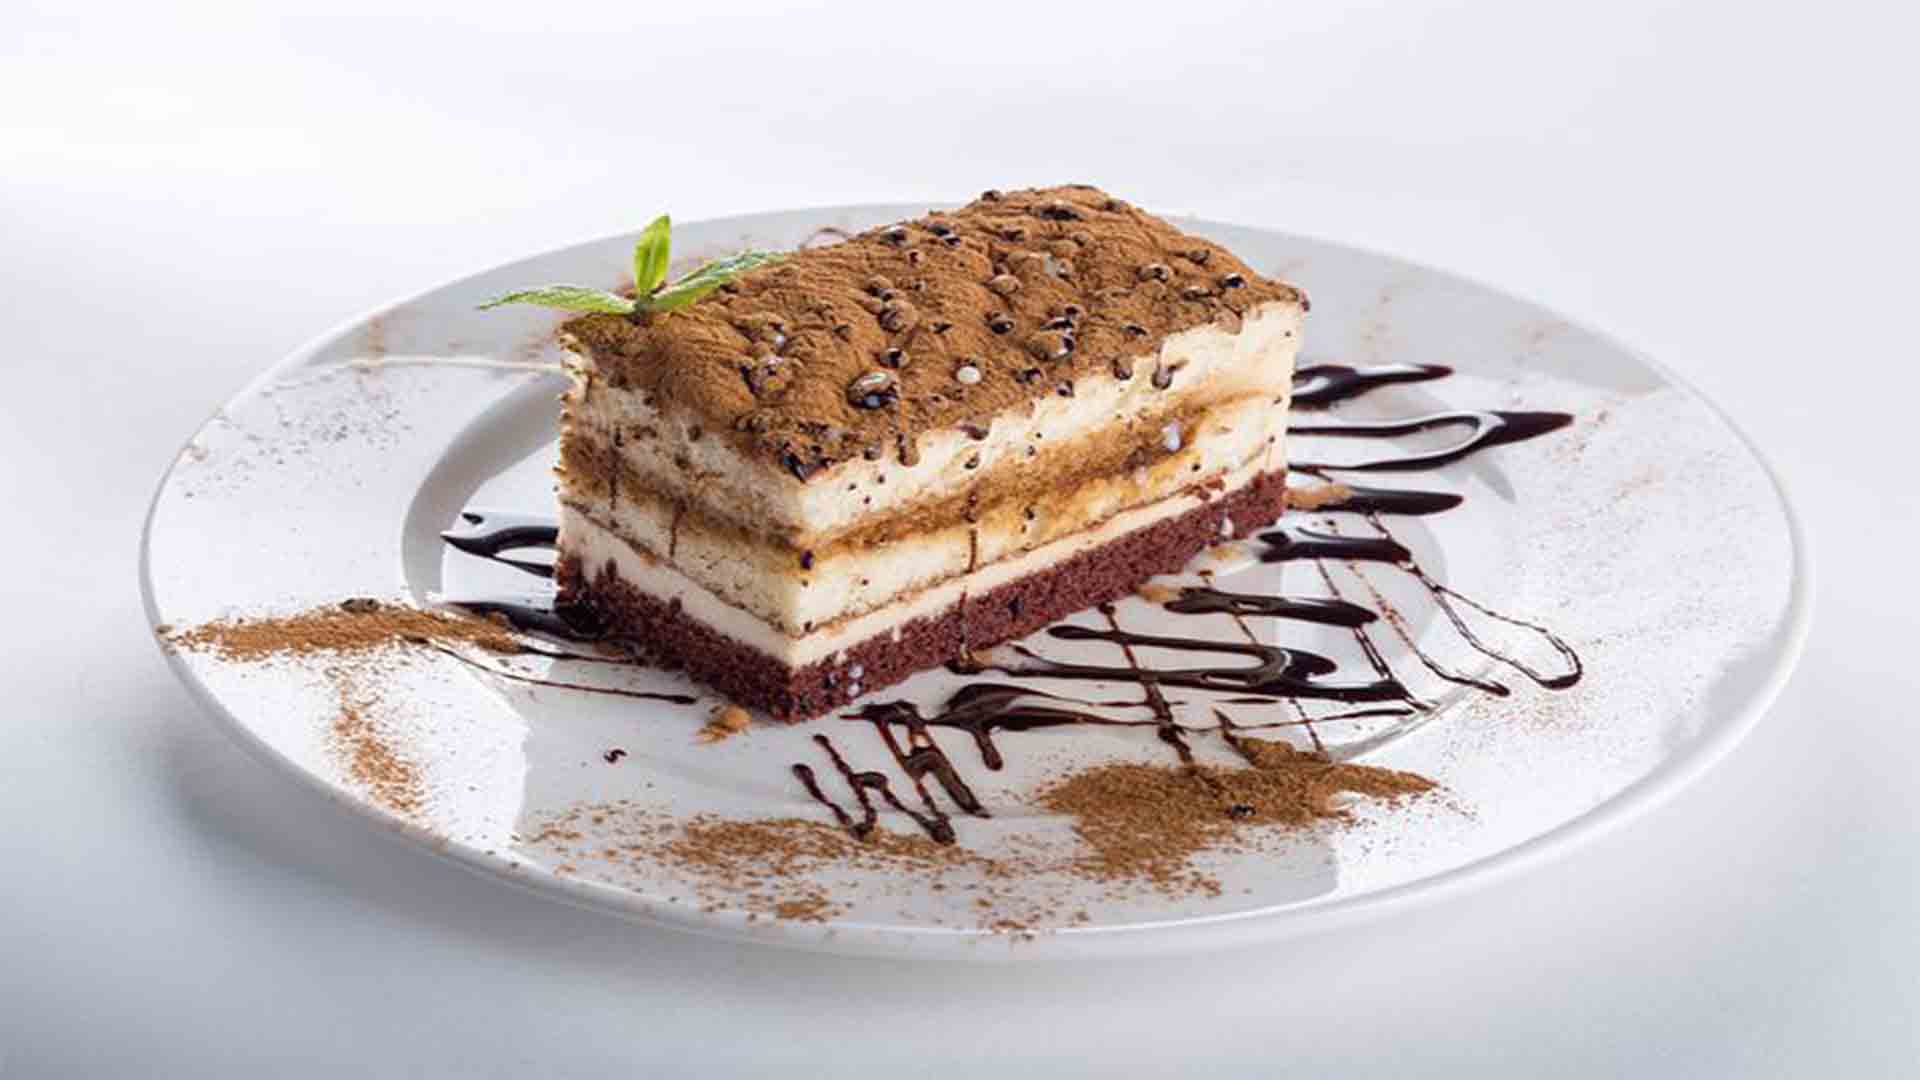 A slice of layered tiramisu cake on a white plate with chocolate drizzle and a dusting of cocoa powder.